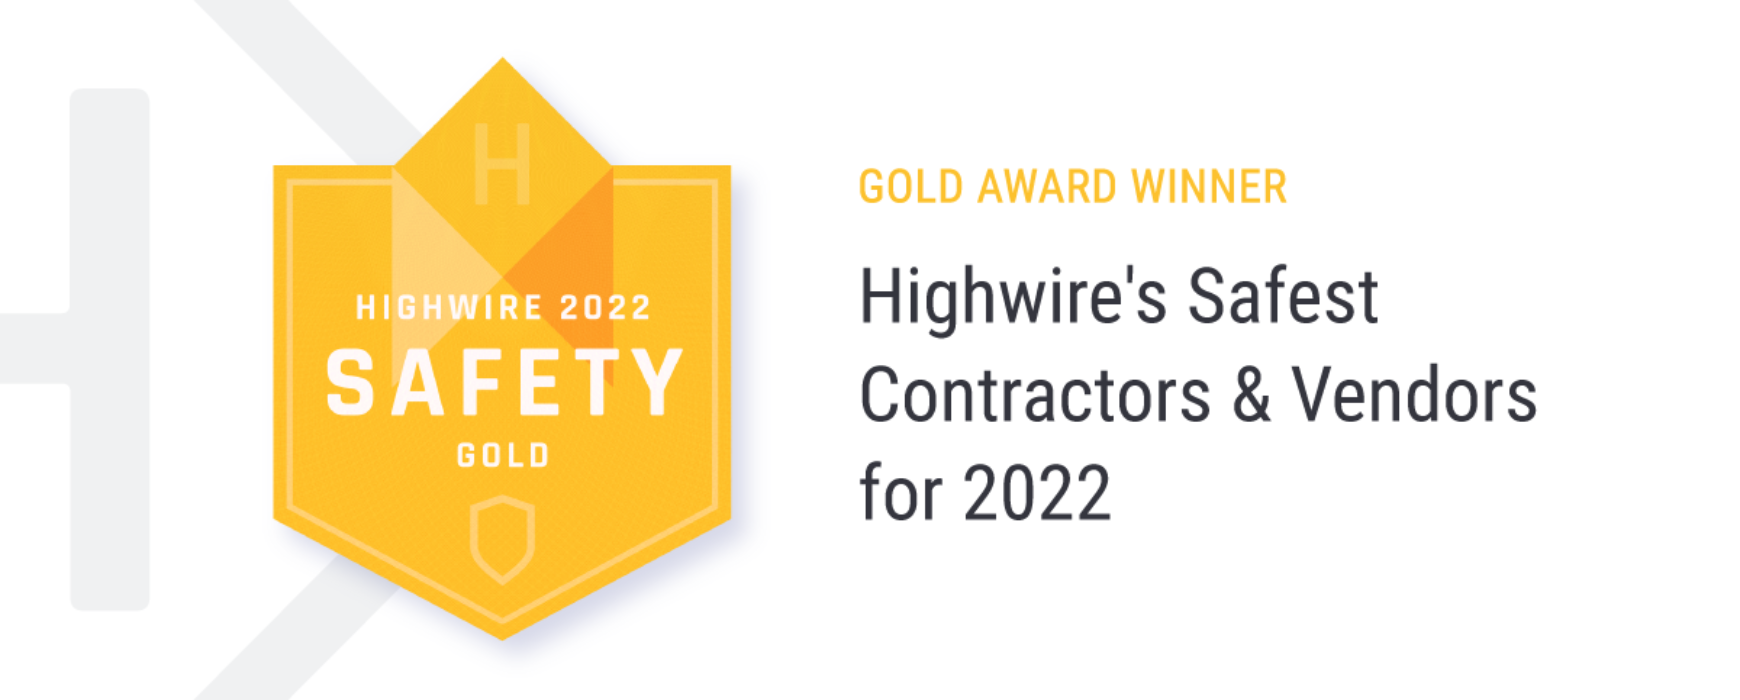 Corrado American Receives Highwire’s Gold Safety Award for 2022